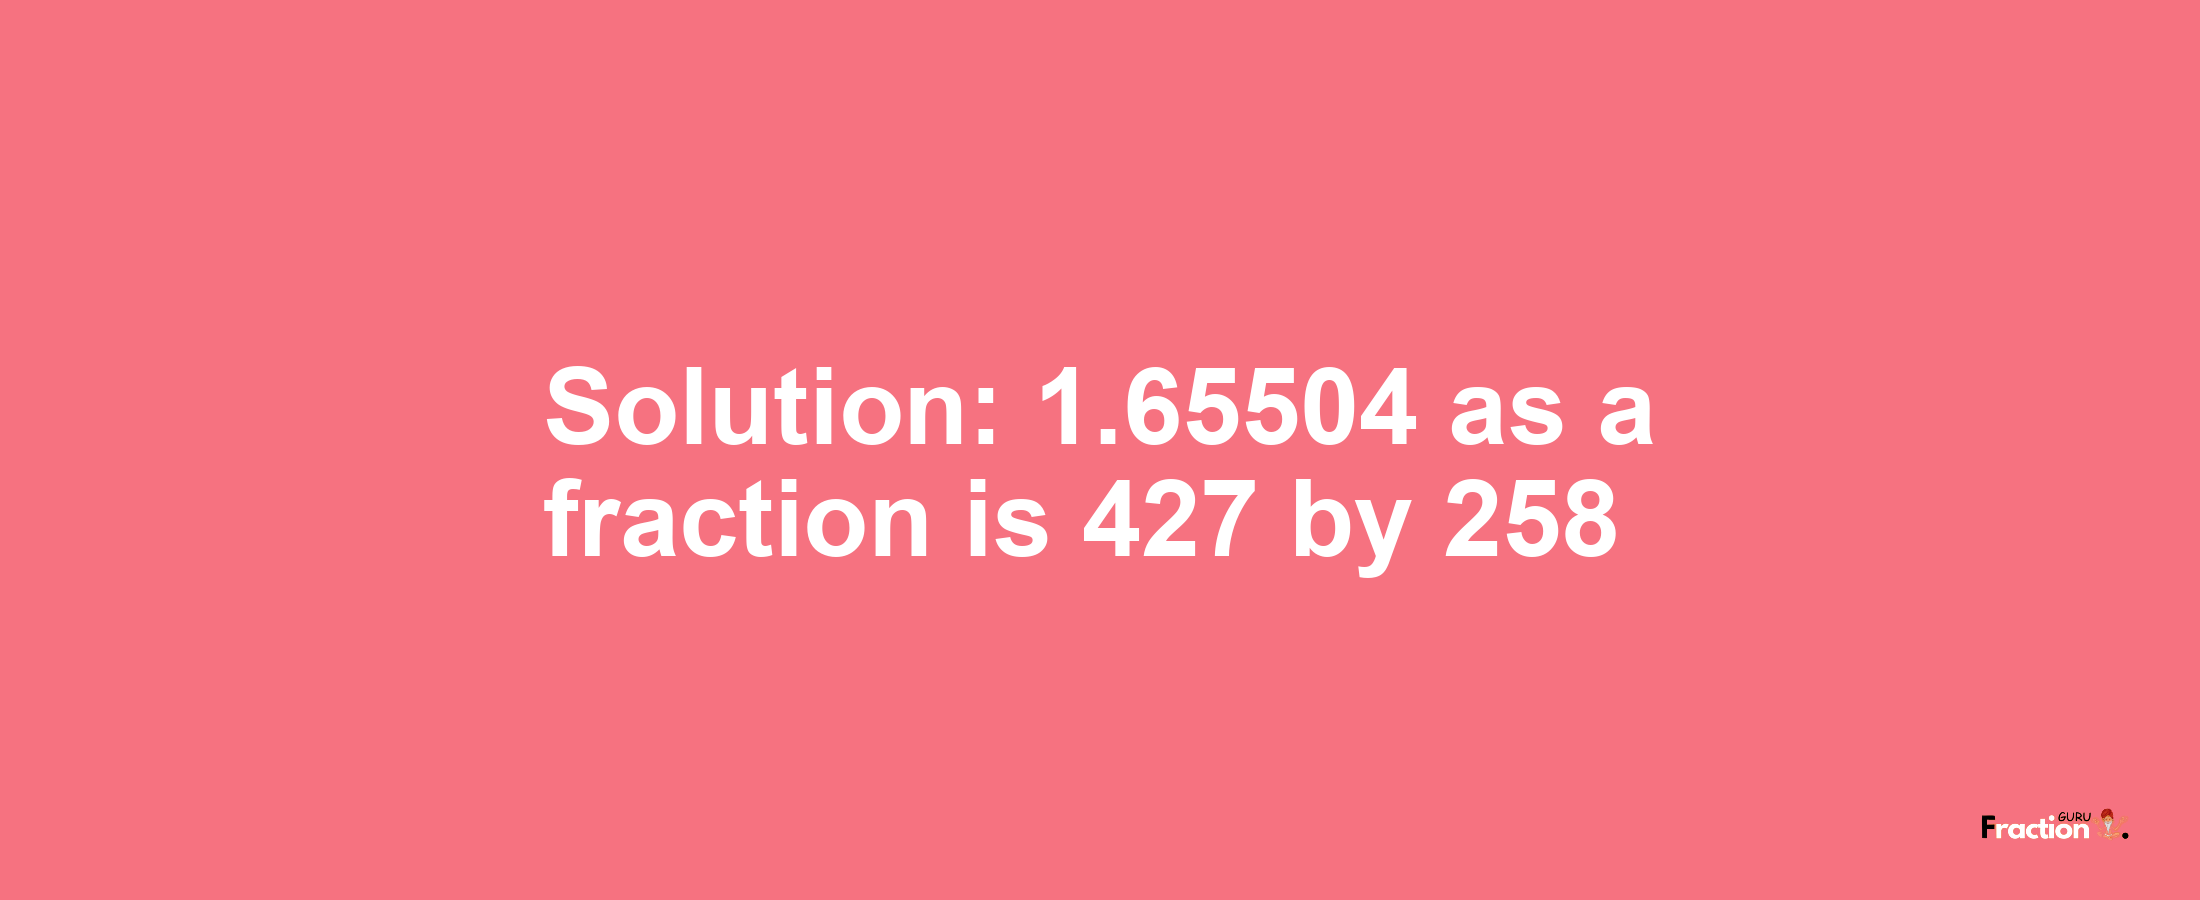 Solution:1.65504 as a fraction is 427/258